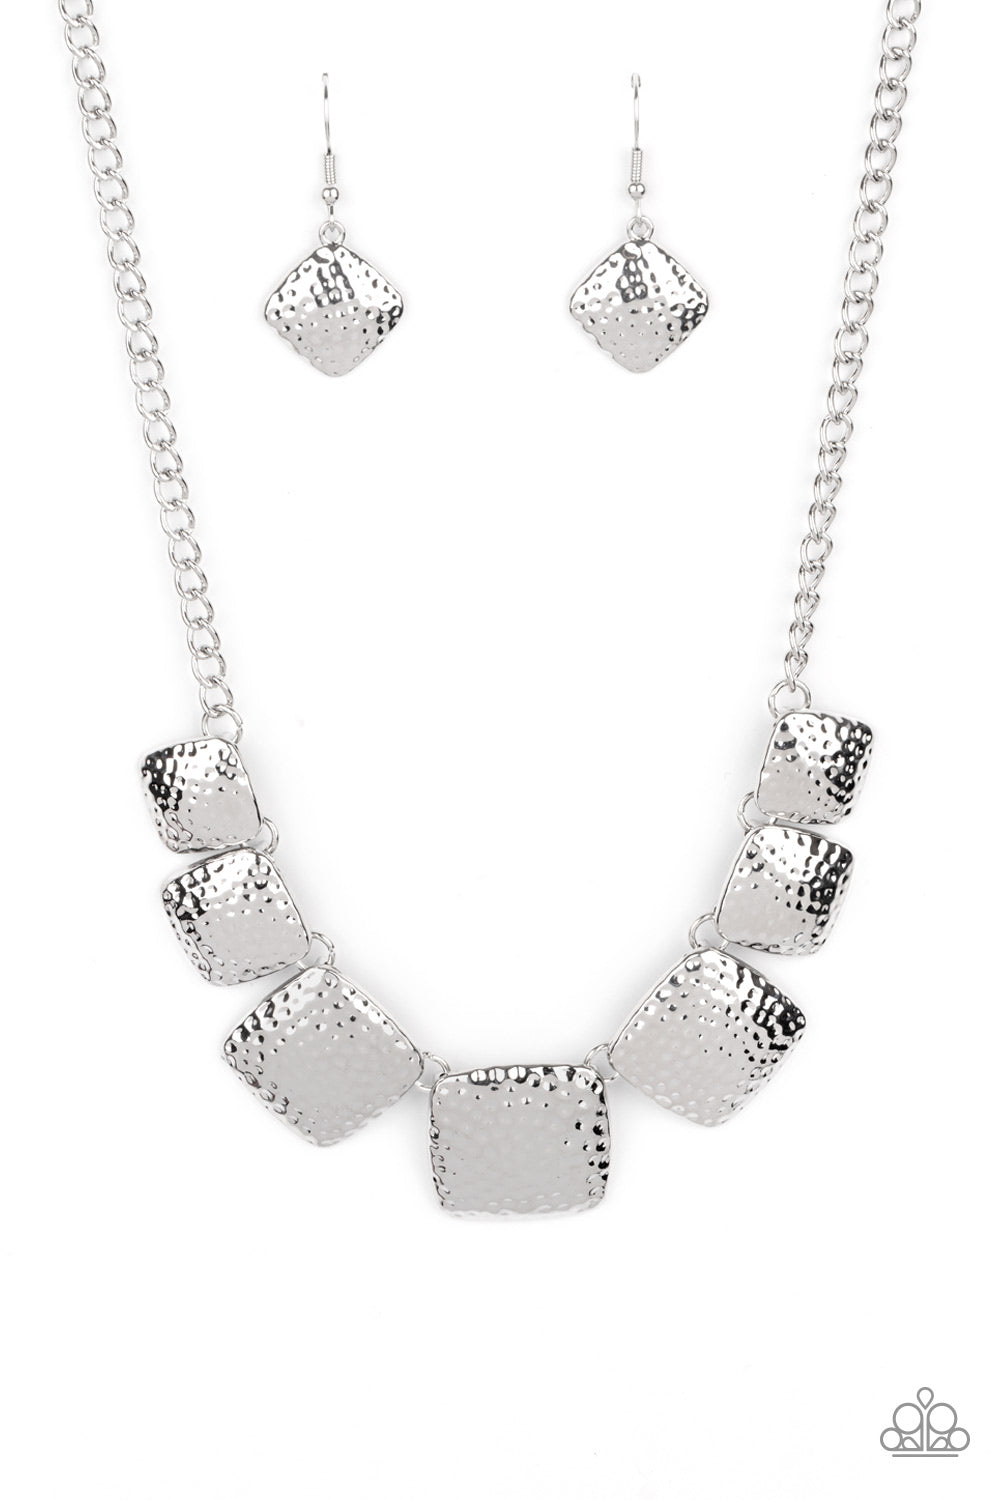 Paparazzi Keeping It RELIC Silver Short Necklace